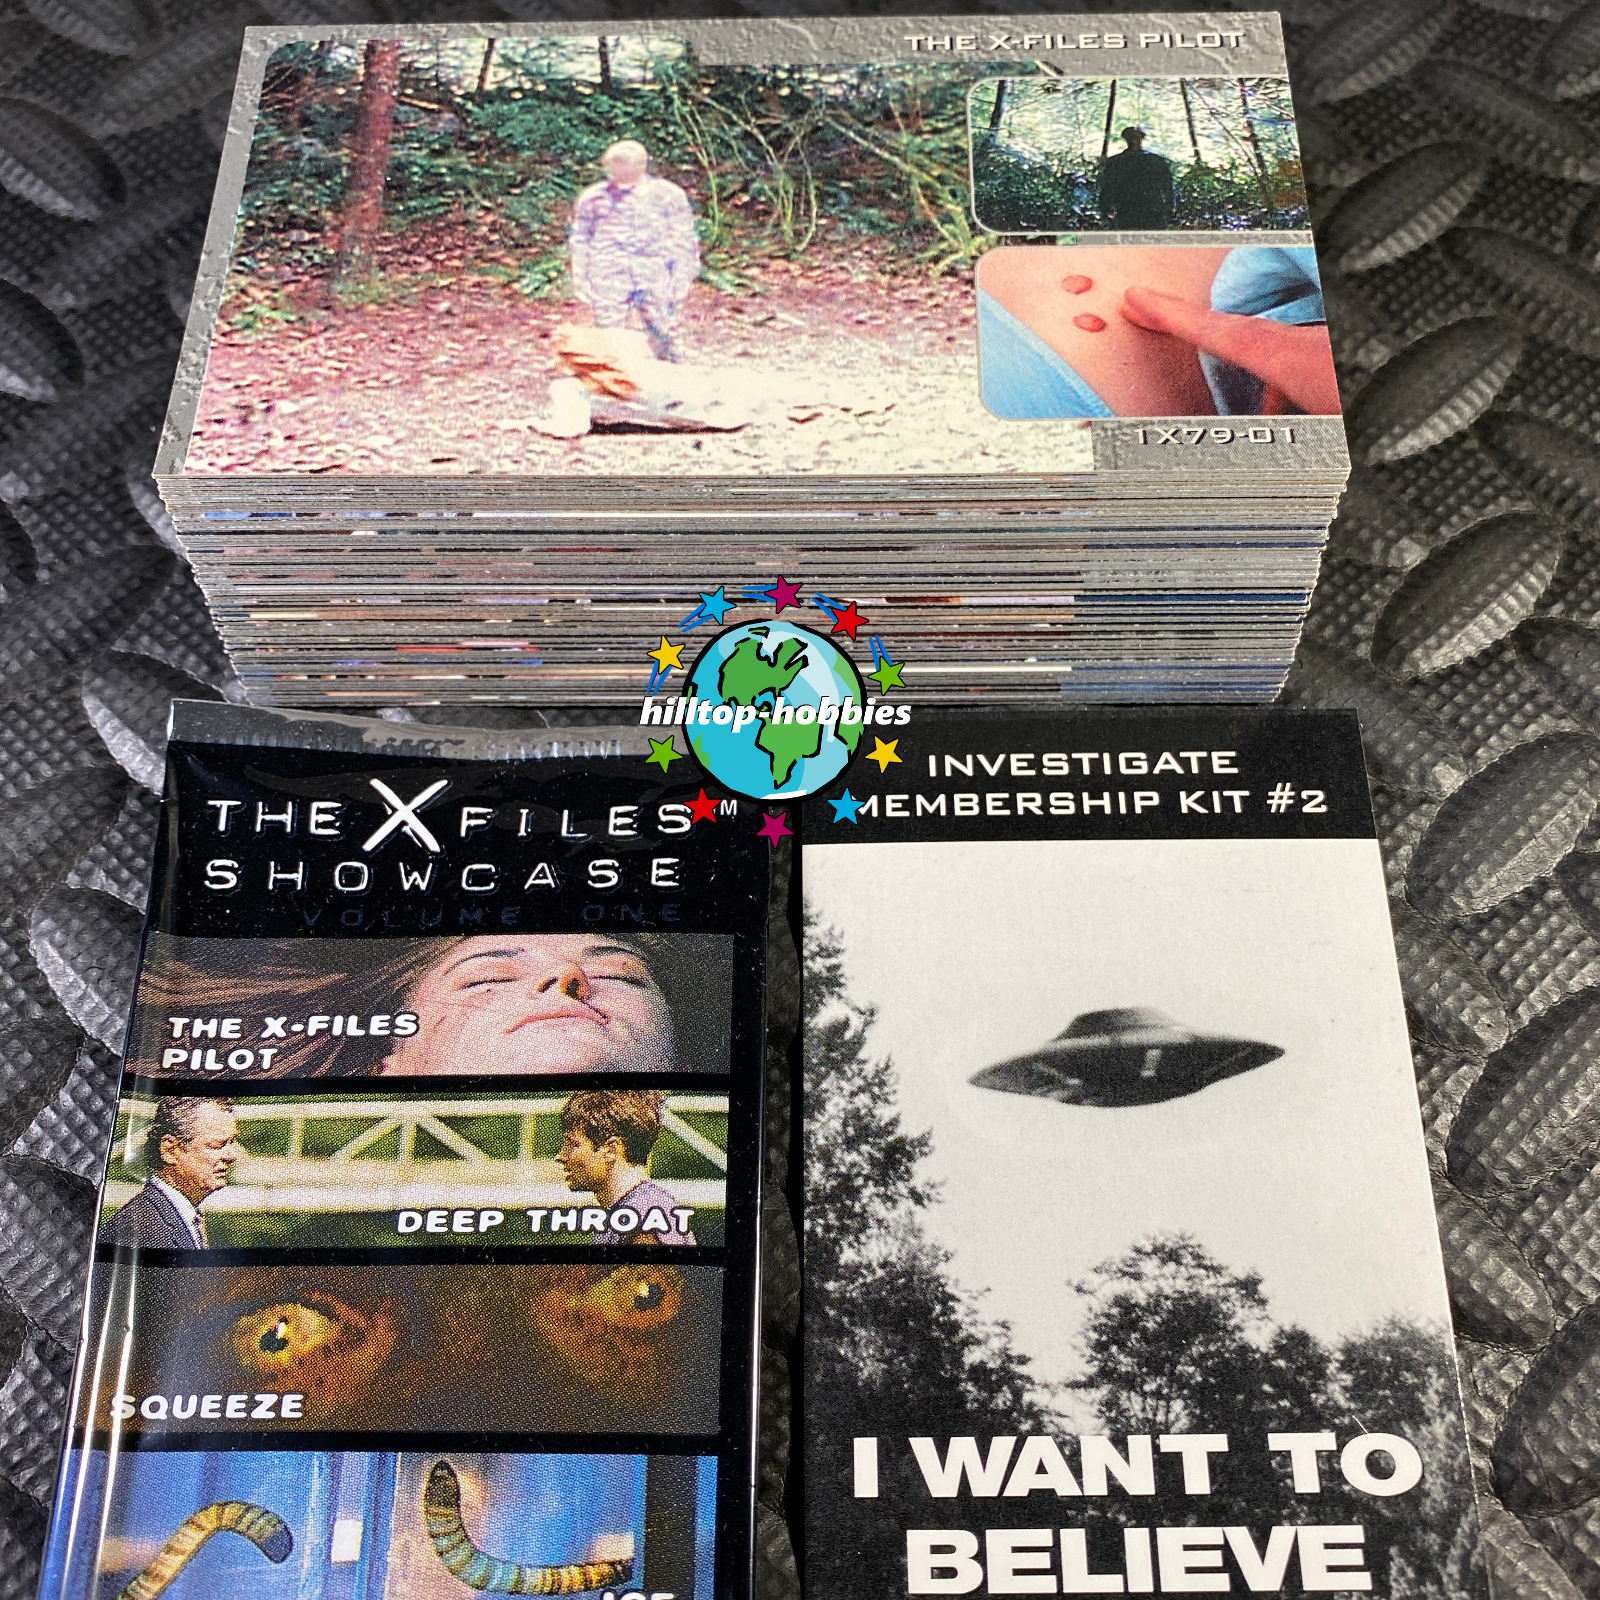 TOPPS 1997 THE X-FILES WIDE/SHOWCASE 72-CARD SET +WRAPPER AND FAN CLUB INSERT